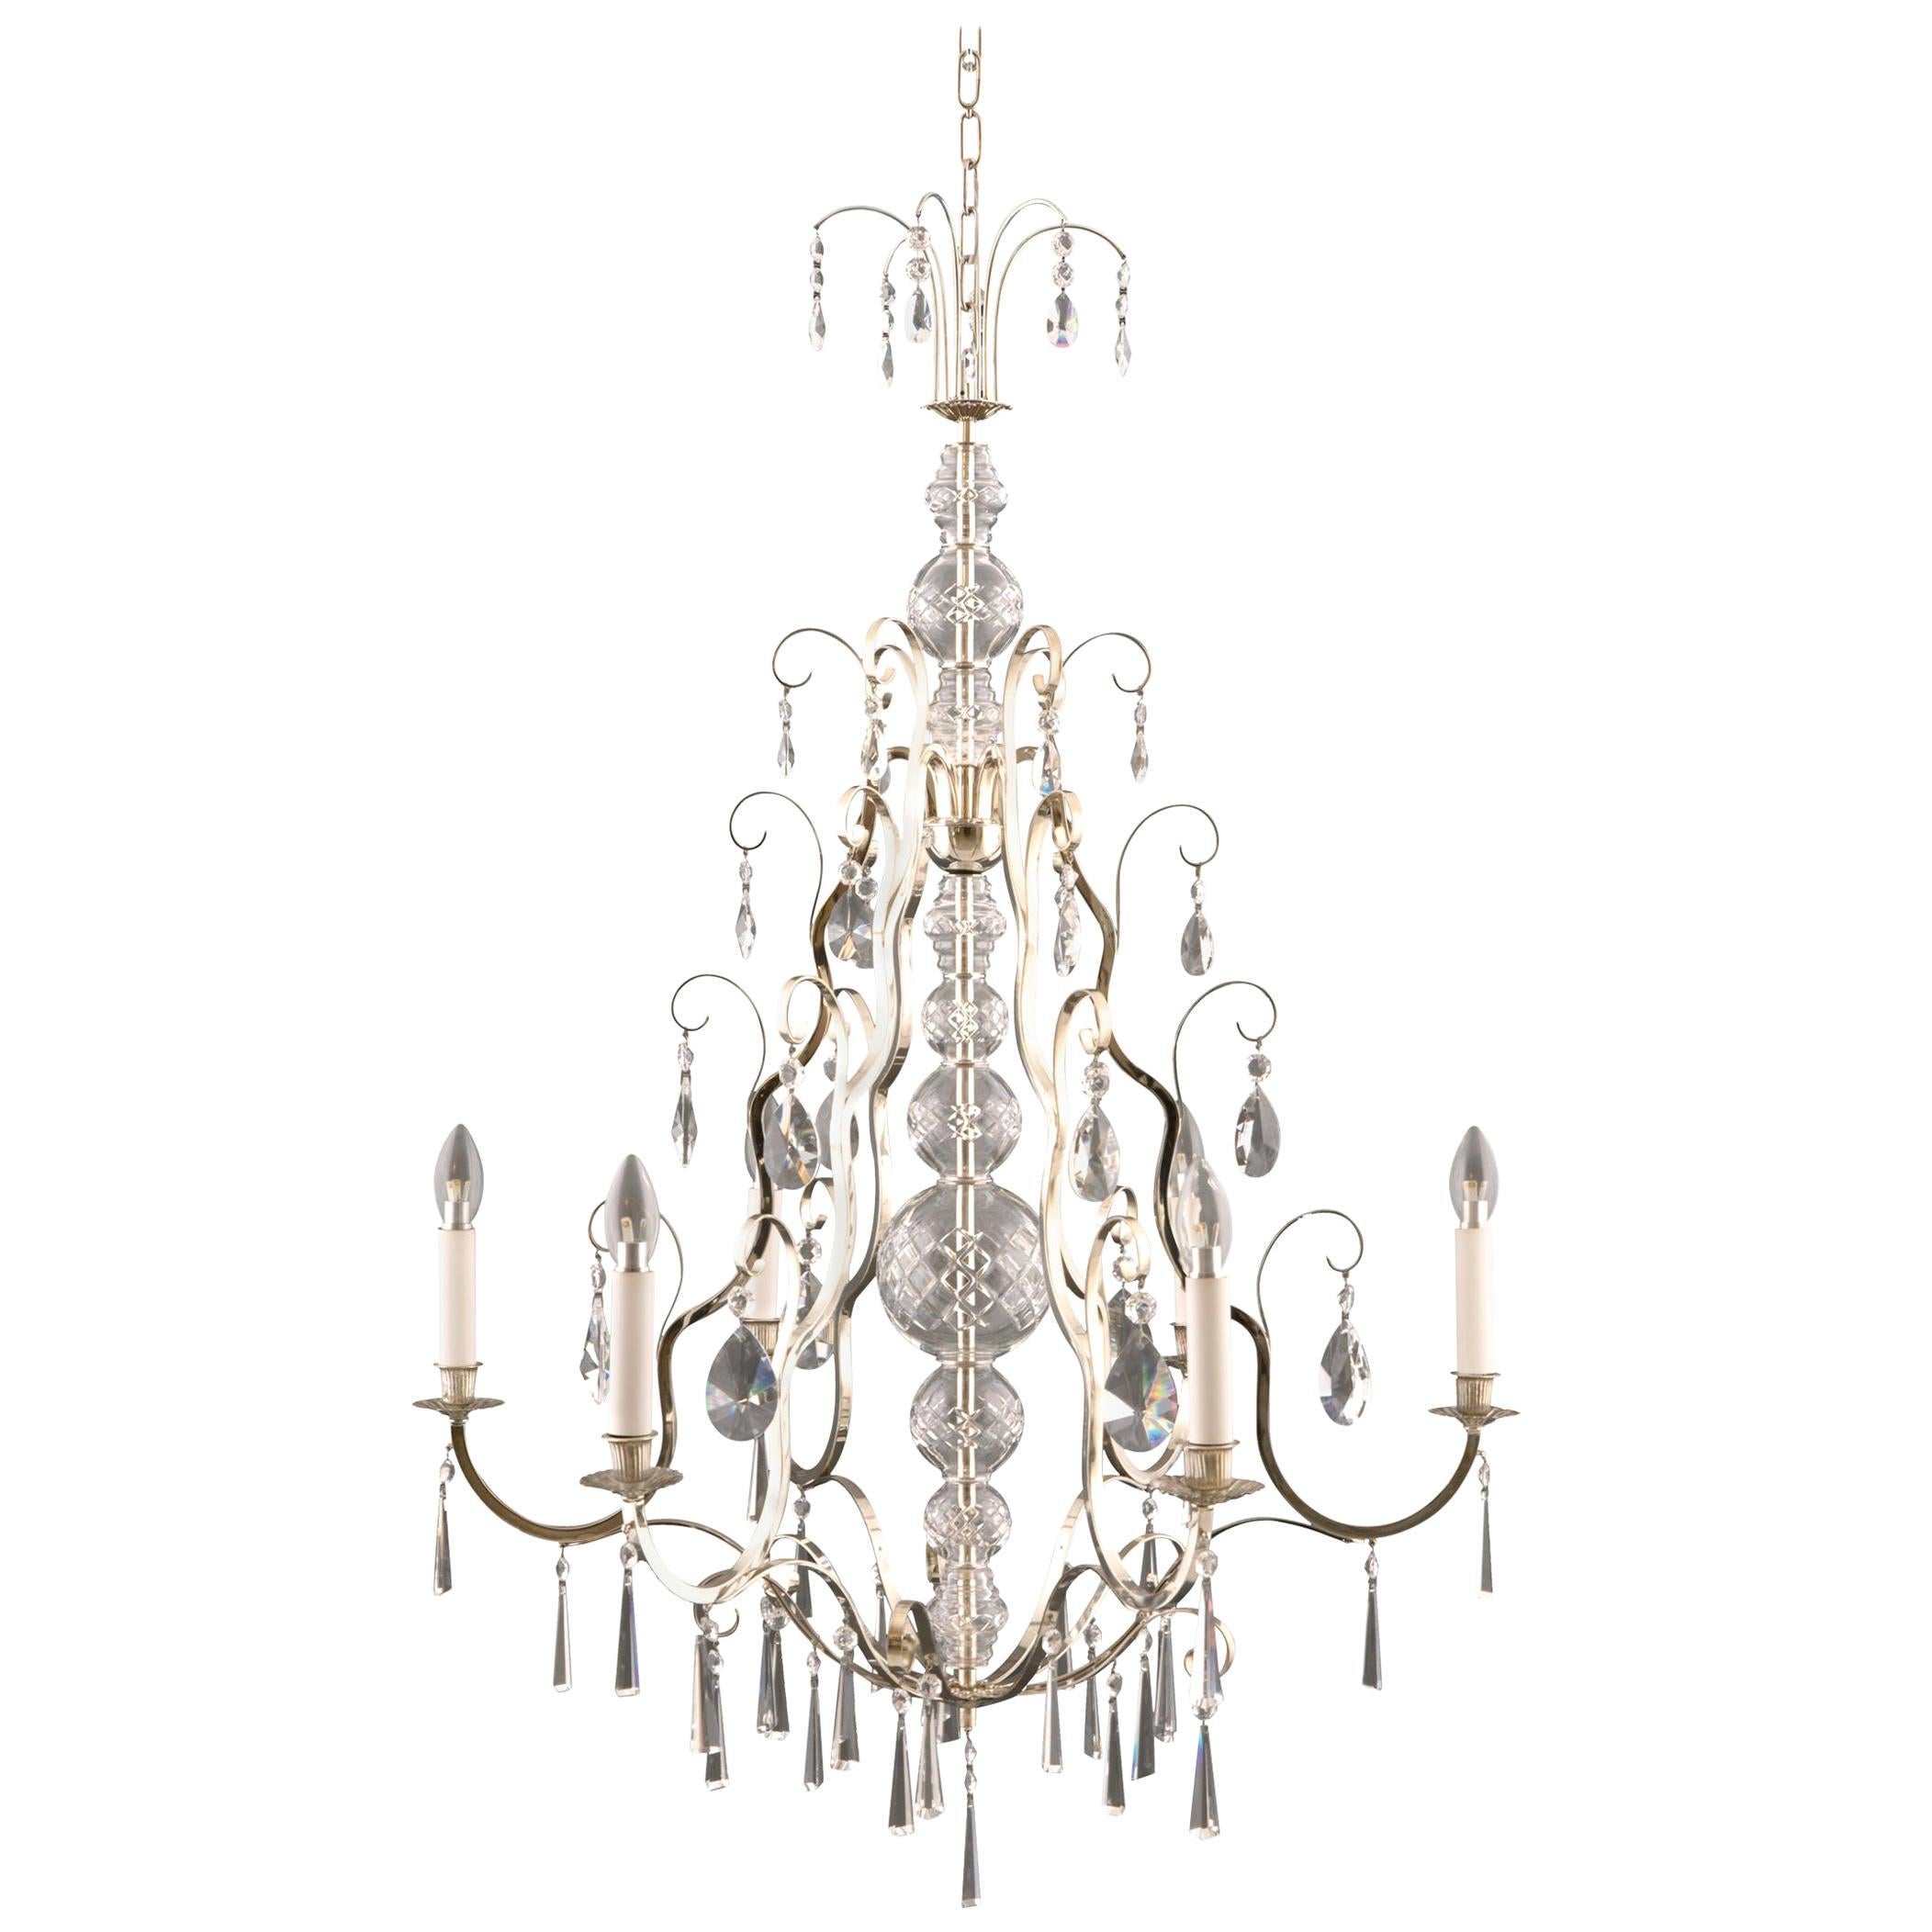 Art Deco Style Brass Crystal Glass Chandelier, Re Edition